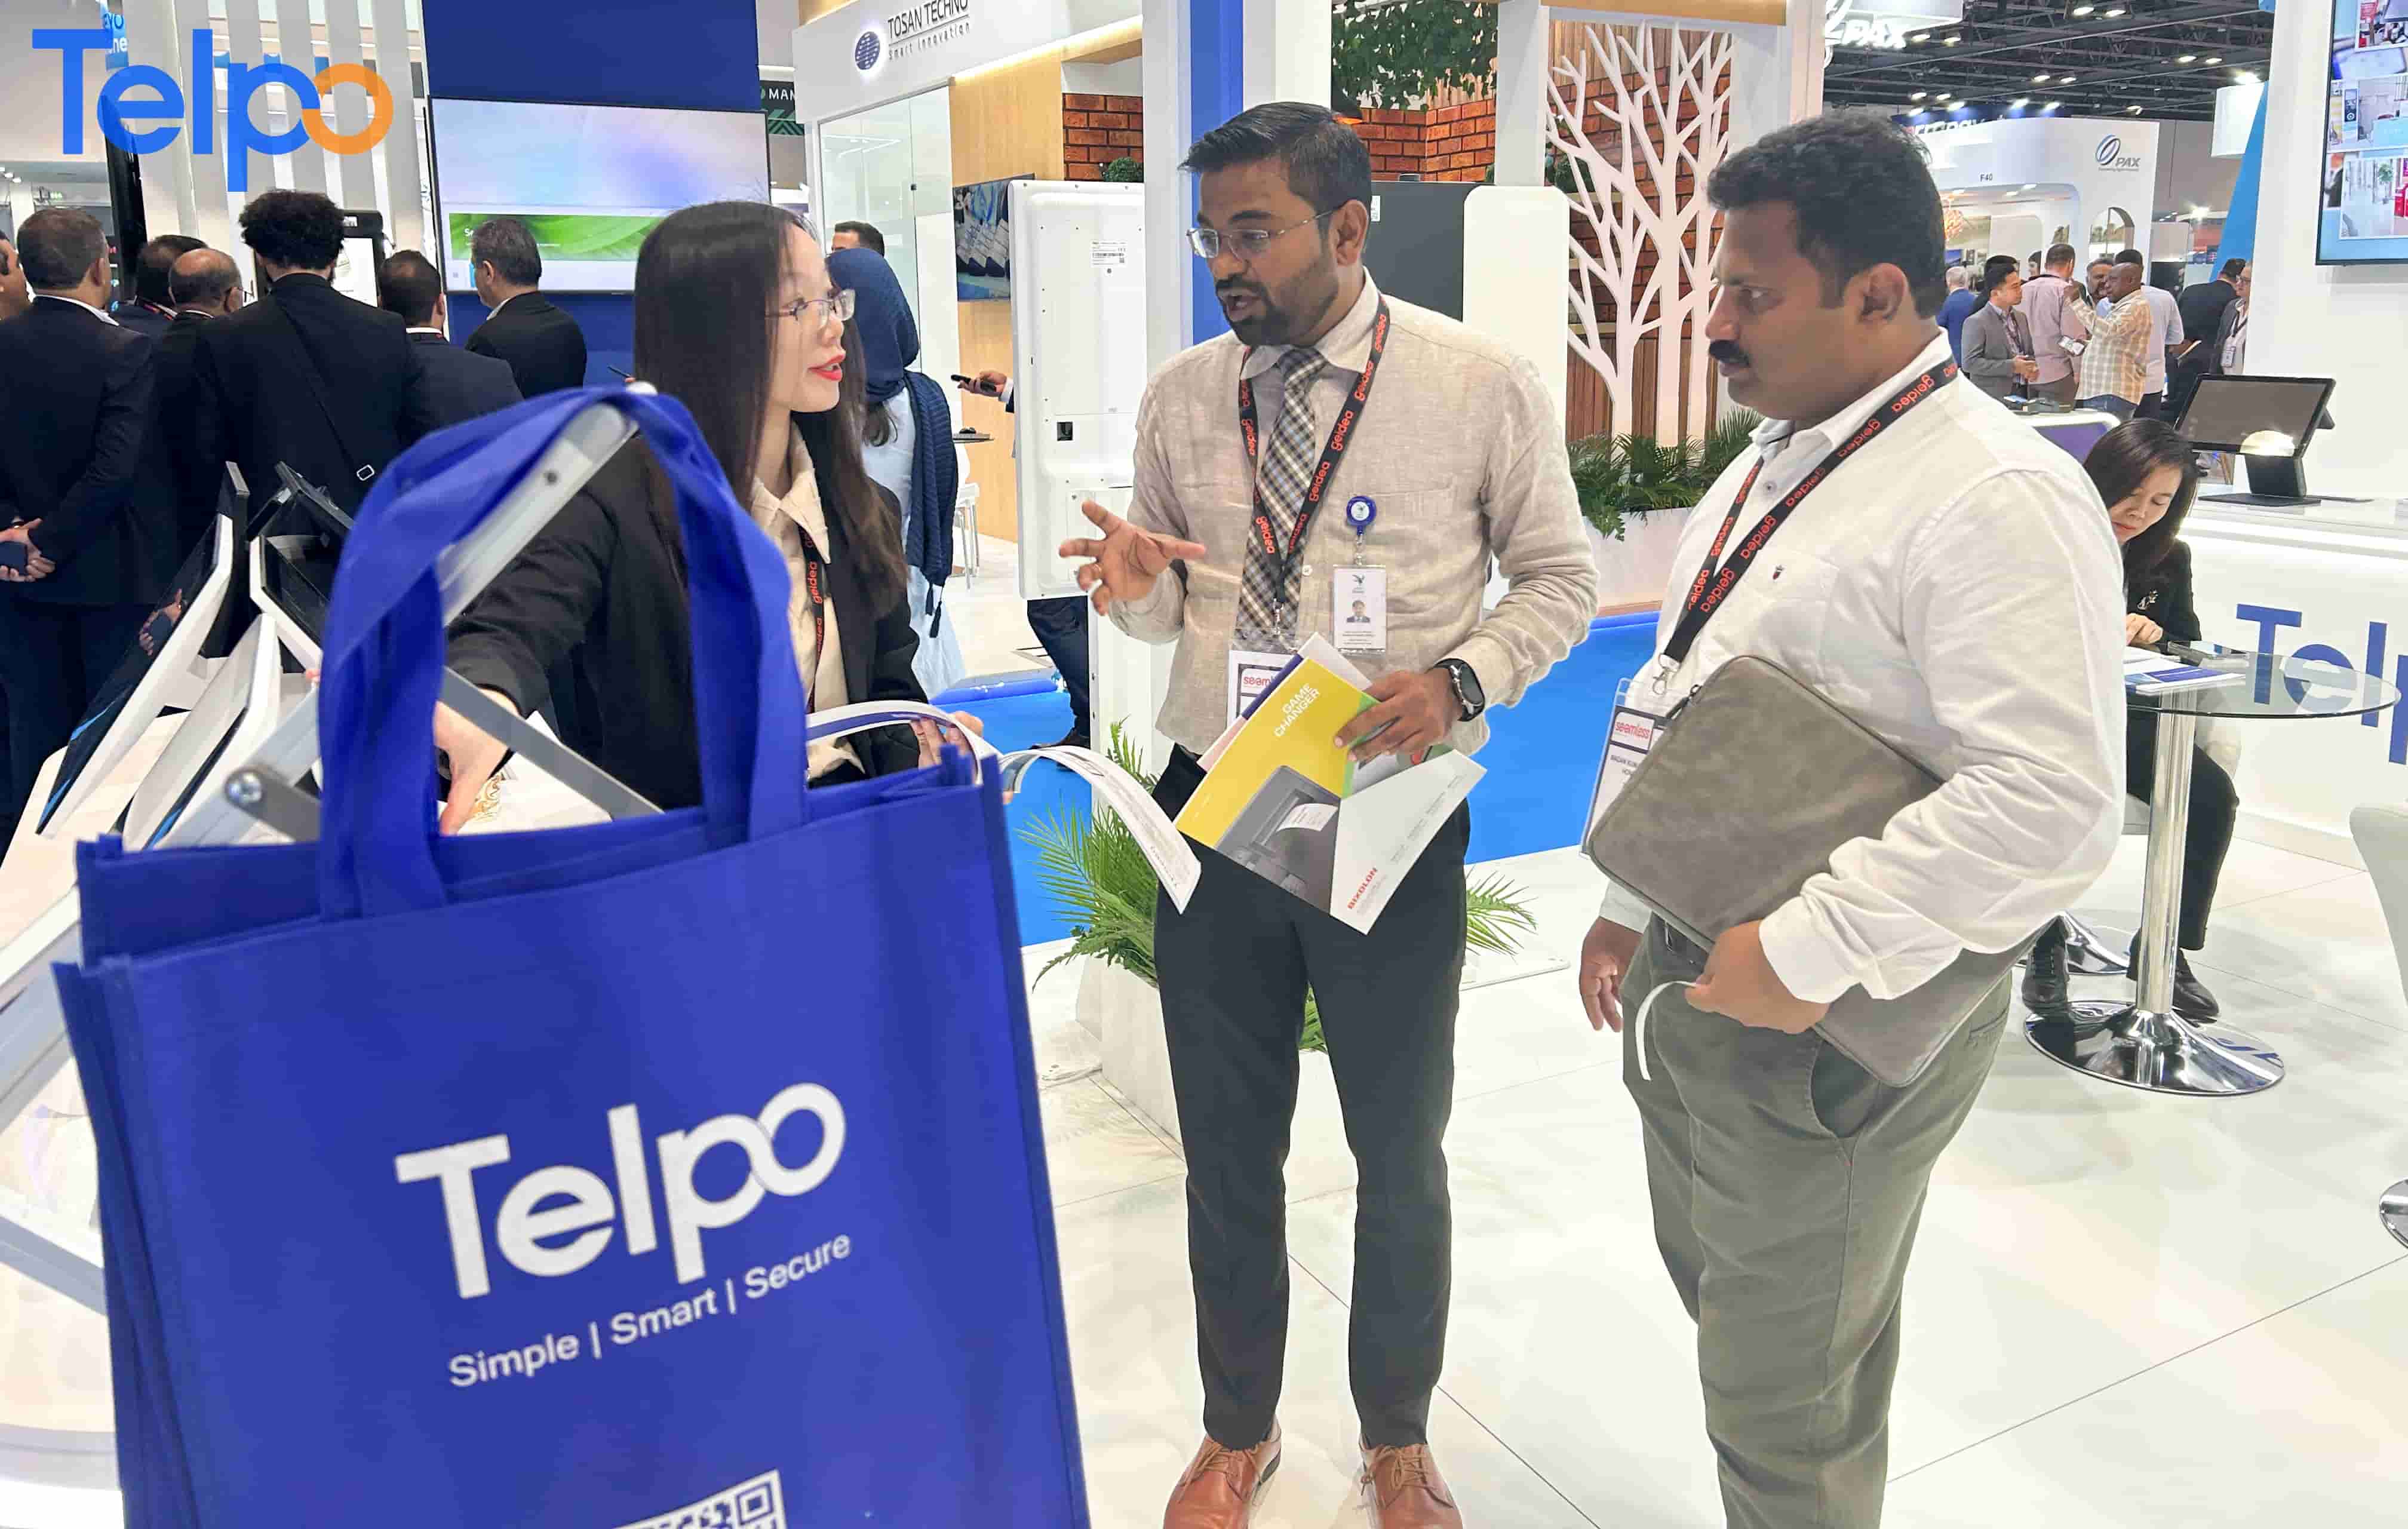 Telpo at Seamless Middle East Exhibition